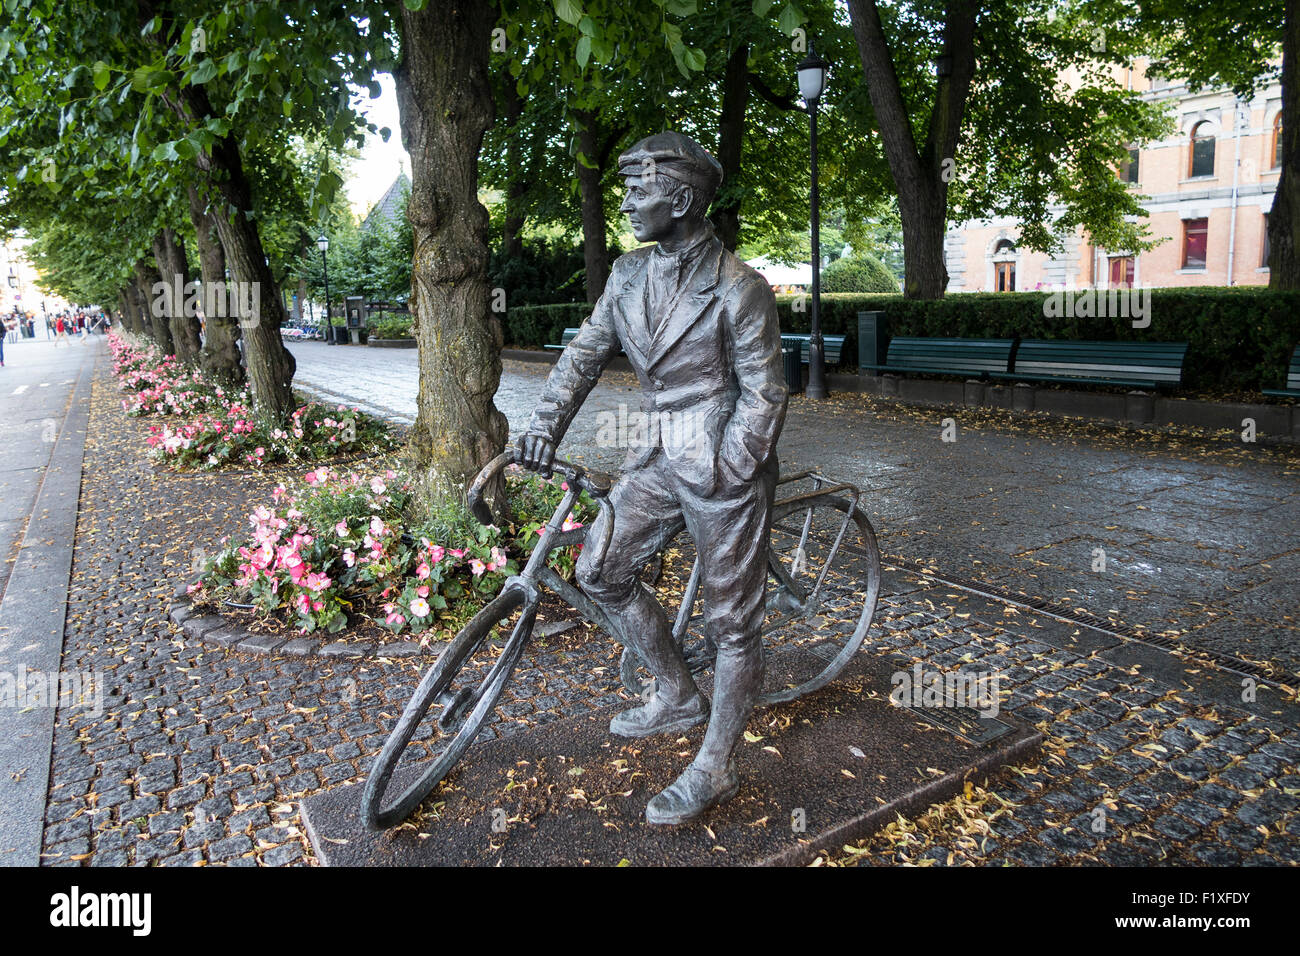 Statue of a man and his bycicle on the streets of Oslo, Norway Stock Photo